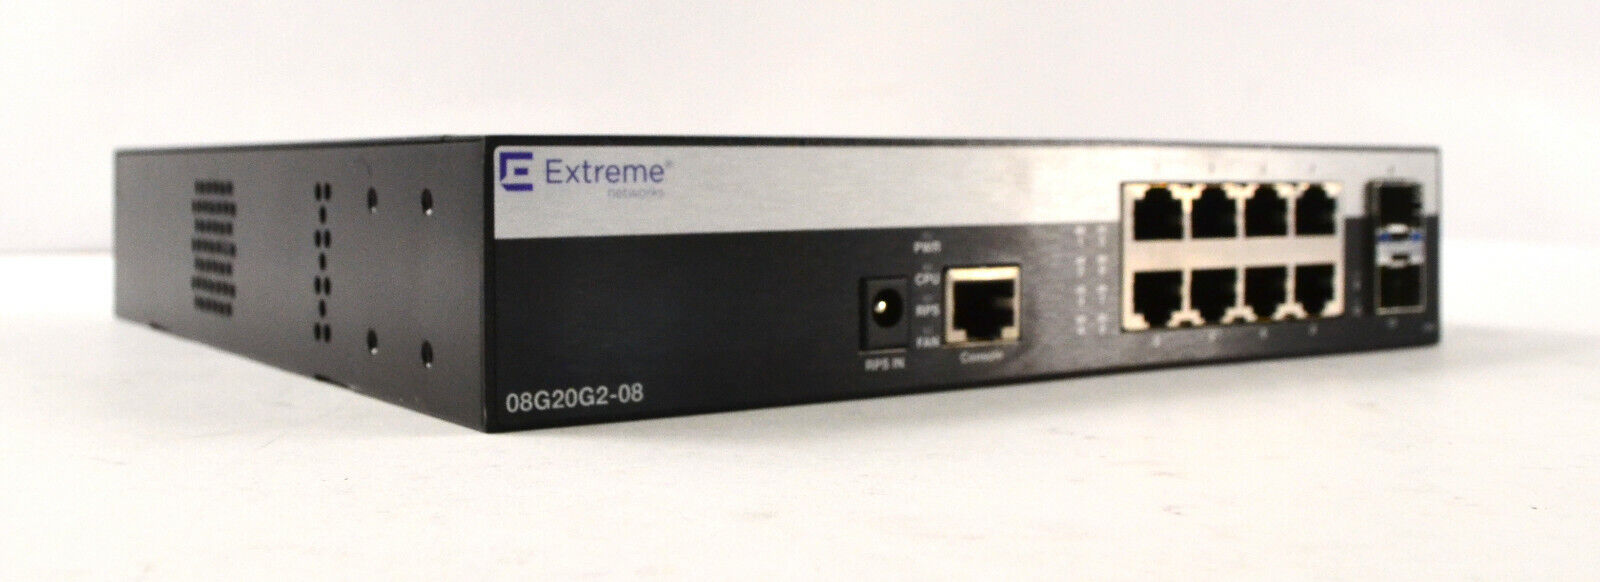 Extreme Networks 08G20G2-08 8 port 10/100/1000 800-Series Layer 2 switch